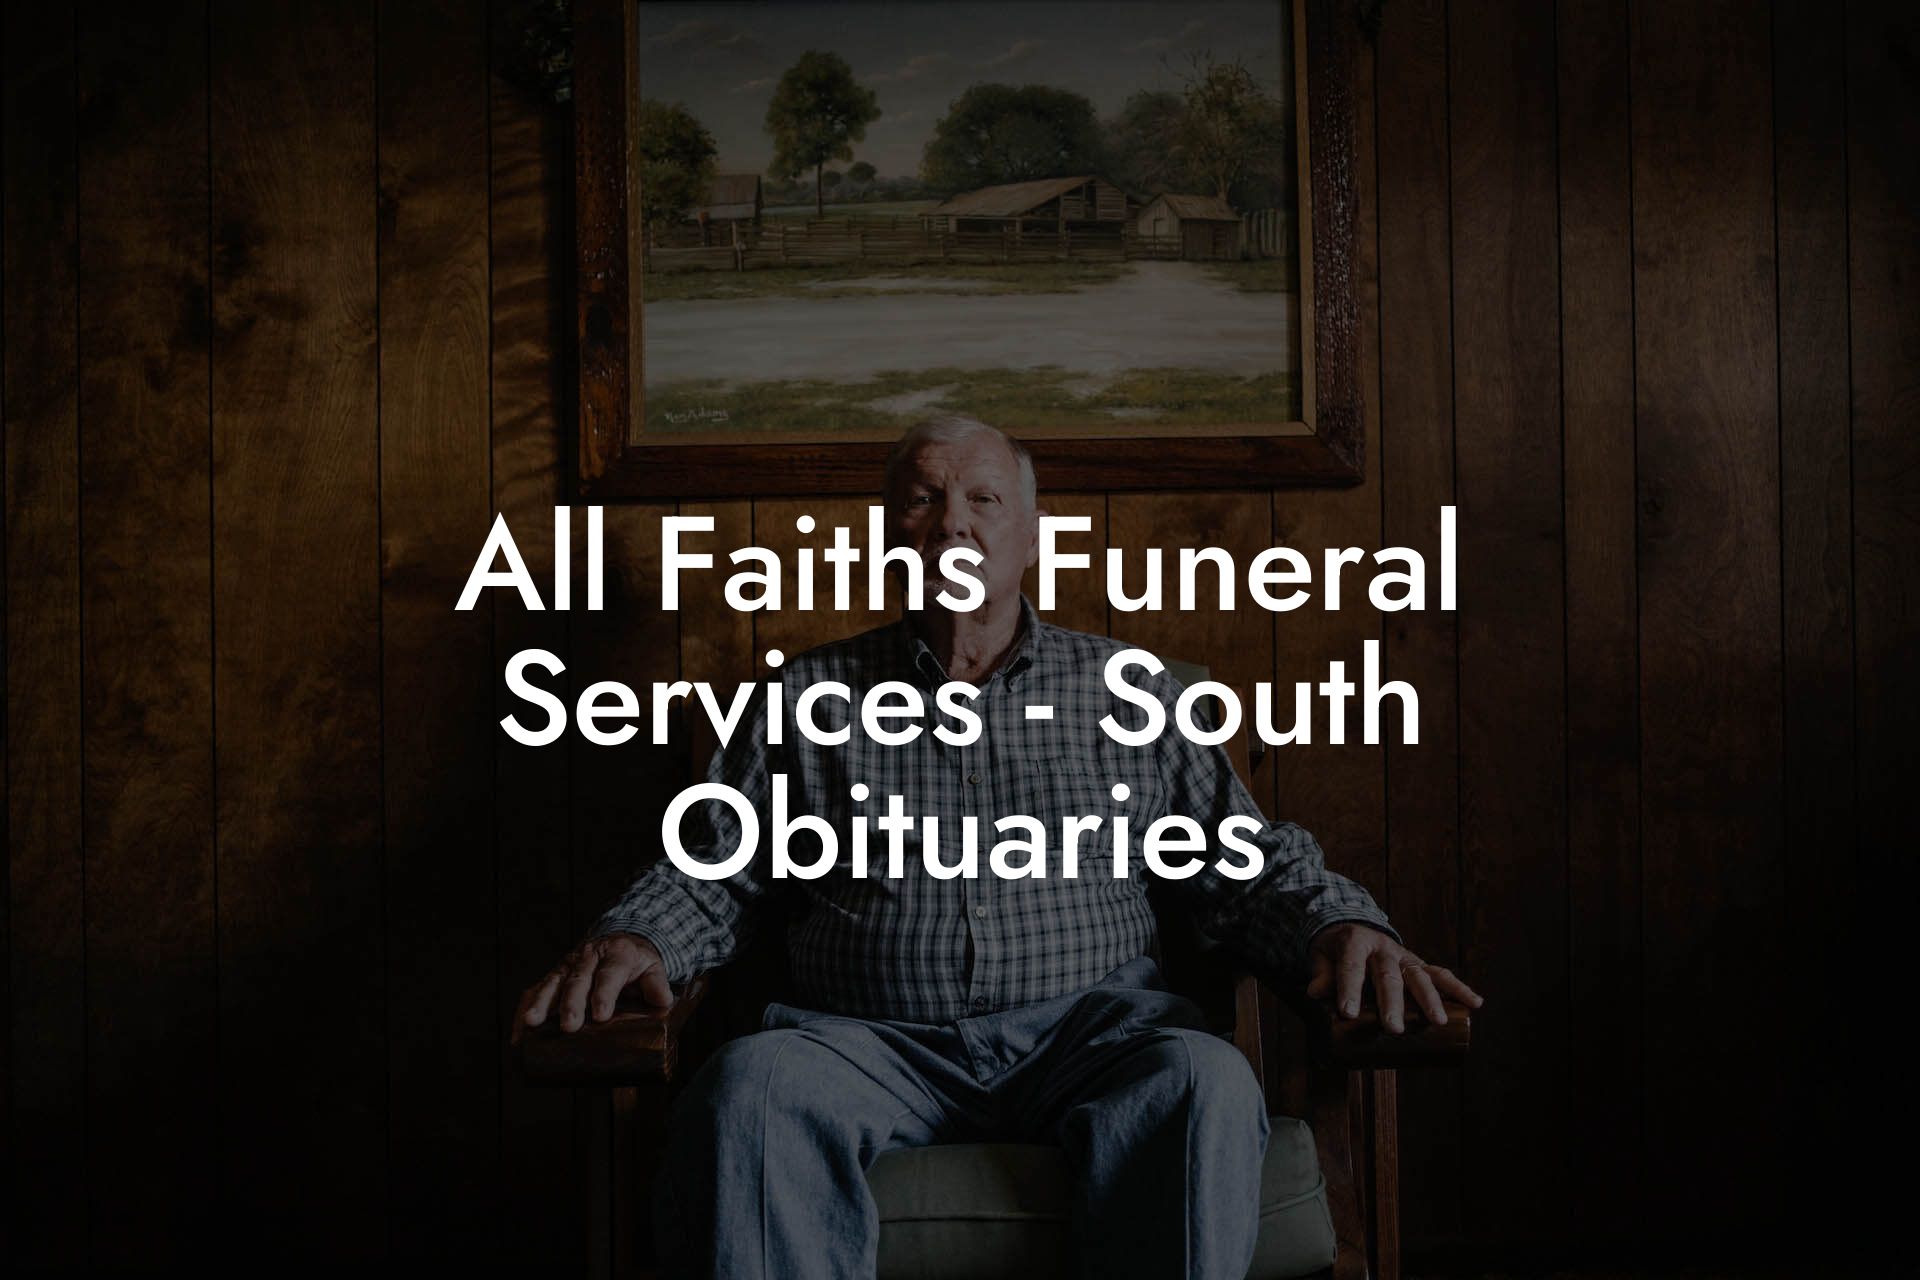 All Faiths Funeral Services - South Obituaries